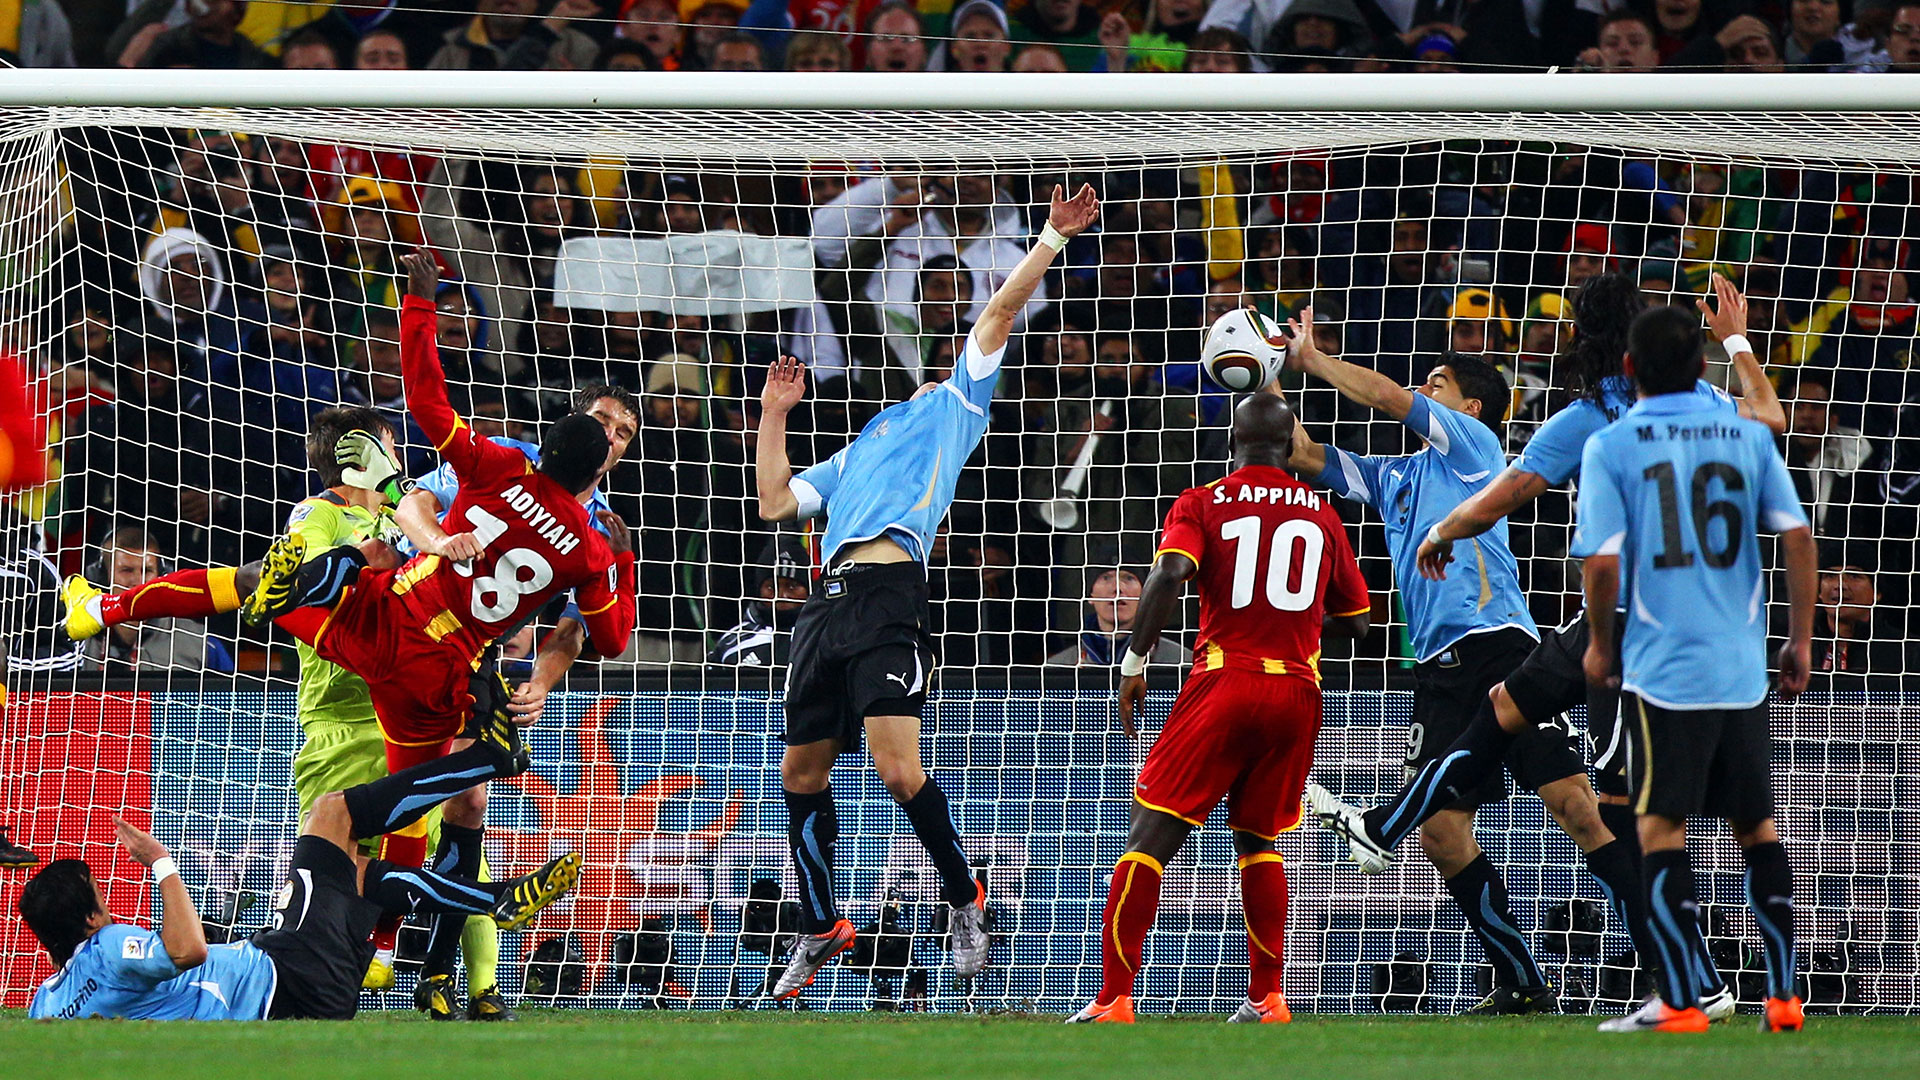 Fan View: Ghana would have reached 2010 World Cup final if they defeated Uruguay